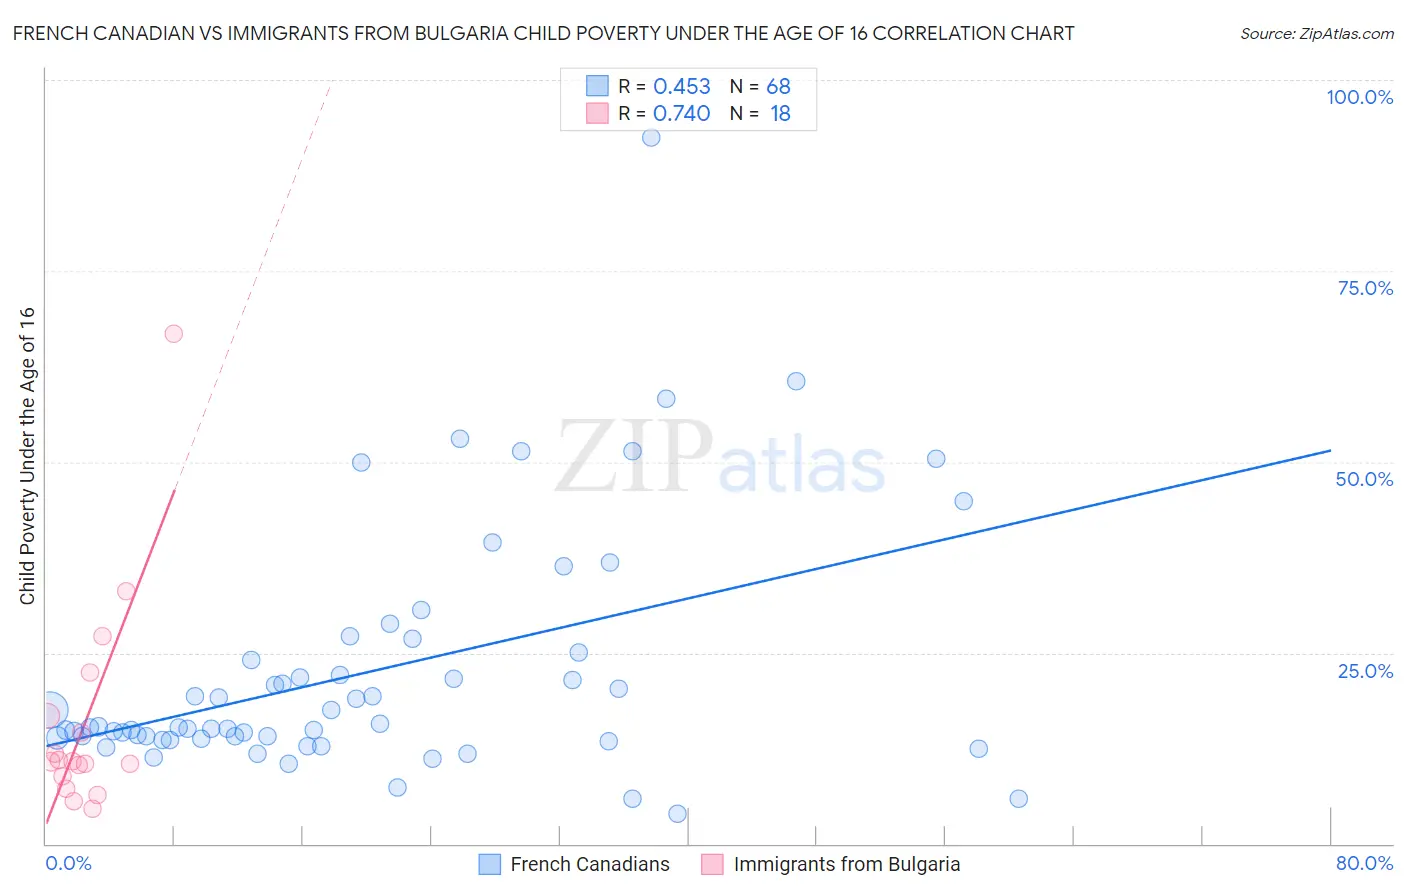 French Canadian vs Immigrants from Bulgaria Child Poverty Under the Age of 16